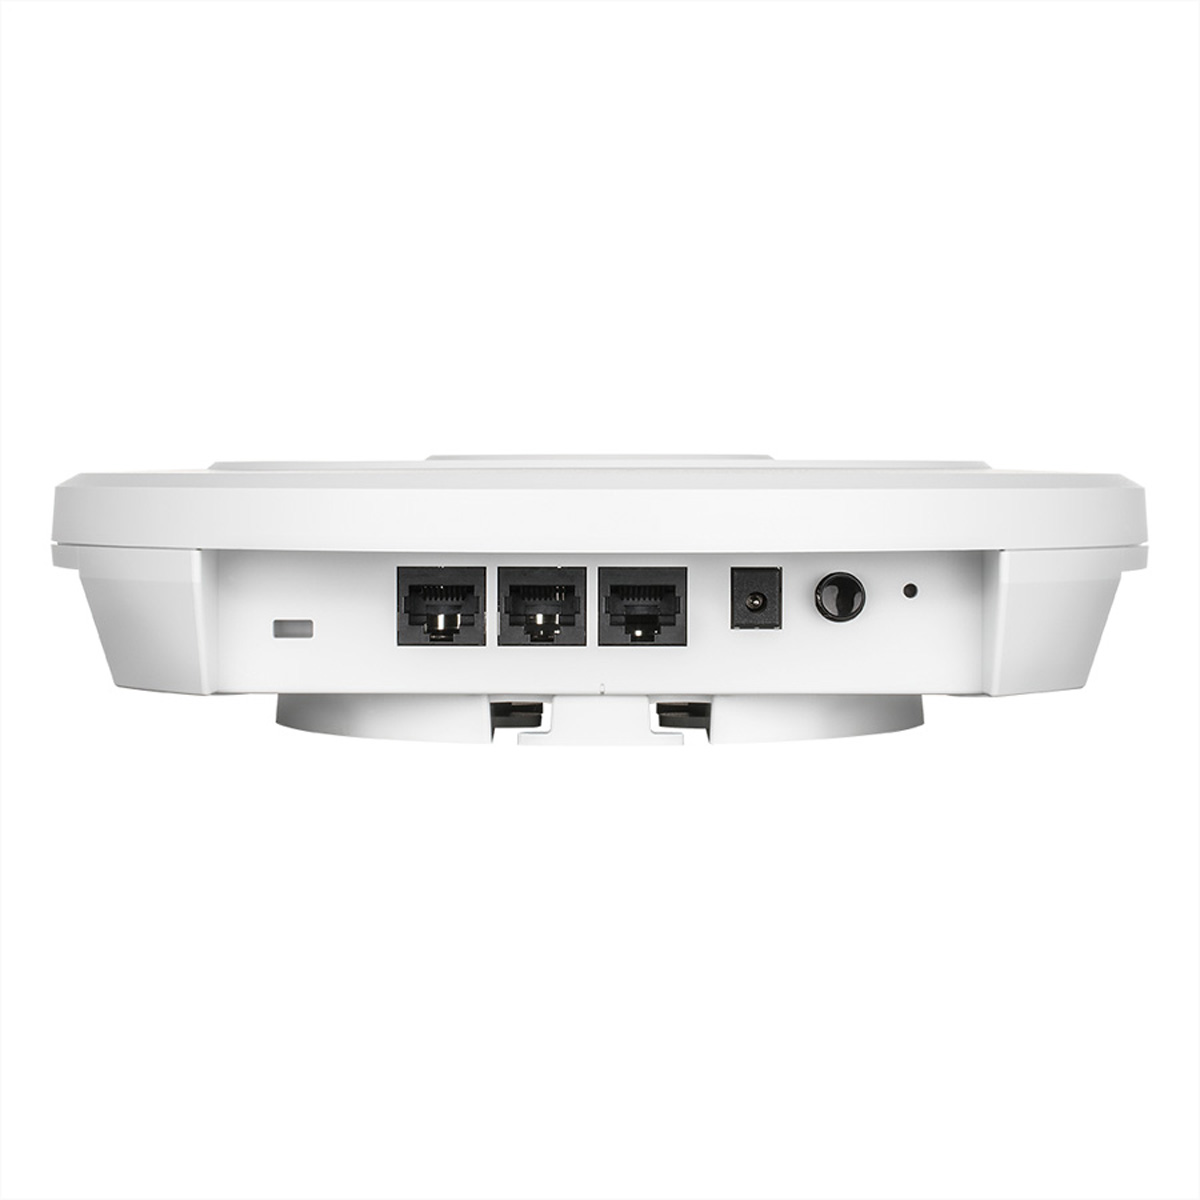 D-LINK DWL-7620AP Unified AC2200 Wave2 LAN Point Tri-Band Gbit/s 2,2 Wireless Access